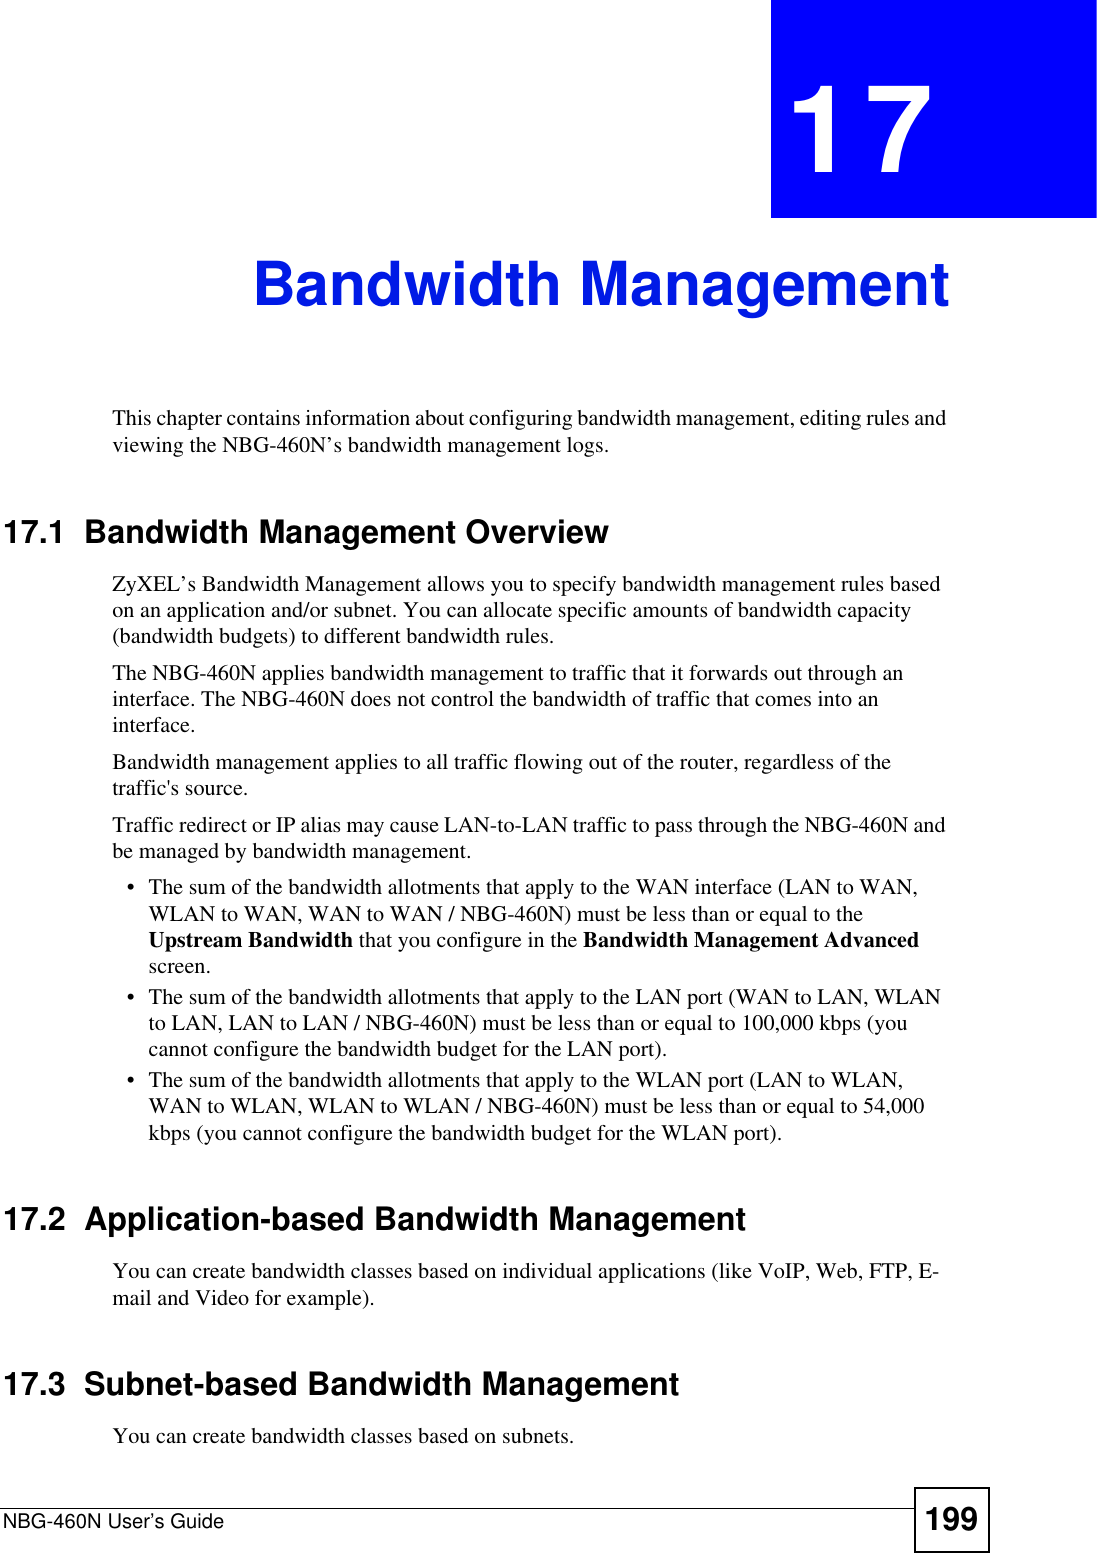 NBG-460N User’s Guide 199CHAPTER 17Bandwidth ManagementThis chapter contains information about configuring bandwidth management, editing rules and viewing the NBG-460N’s bandwidth management logs.17.1  Bandwidth Management Overview ZyXEL’s Bandwidth Management allows you to specify bandwidth management rules based on an application and/or subnet. You can allocate specific amounts of bandwidth capacity (bandwidth budgets) to different bandwidth rules. The NBG-460N applies bandwidth management to traffic that it forwards out through an interface. The NBG-460N does not control the bandwidth of traffic that comes into an interface.Bandwidth management applies to all traffic flowing out of the router, regardless of the traffic&apos;s source.Traffic redirect or IP alias may cause LAN-to-LAN traffic to pass through the NBG-460N and be managed by bandwidth management. • The sum of the bandwidth allotments that apply to the WAN interface (LAN to WAN, WLAN to WAN, WAN to WAN / NBG-460N) must be less than or equal to the Upstream Bandwidth that you configure in the Bandwidth Management Advancedscreen. • The sum of the bandwidth allotments that apply to the LAN port (WAN to LAN, WLAN to LAN, LAN to LAN / NBG-460N) must be less than or equal to 100,000 kbps (you cannot configure the bandwidth budget for the LAN port). • The sum of the bandwidth allotments that apply to the WLAN port (LAN to WLAN, WAN to WLAN, WLAN to WLAN / NBG-460N) must be less than or equal to 54,000 kbps (you cannot configure the bandwidth budget for the WLAN port). 17.2  Application-based Bandwidth ManagementYou can create bandwidth classes based on individual applications (like VoIP, Web, FTP, E-mail and Video for example).17.3  Subnet-based Bandwidth ManagementYou can create bandwidth classes based on subnets.